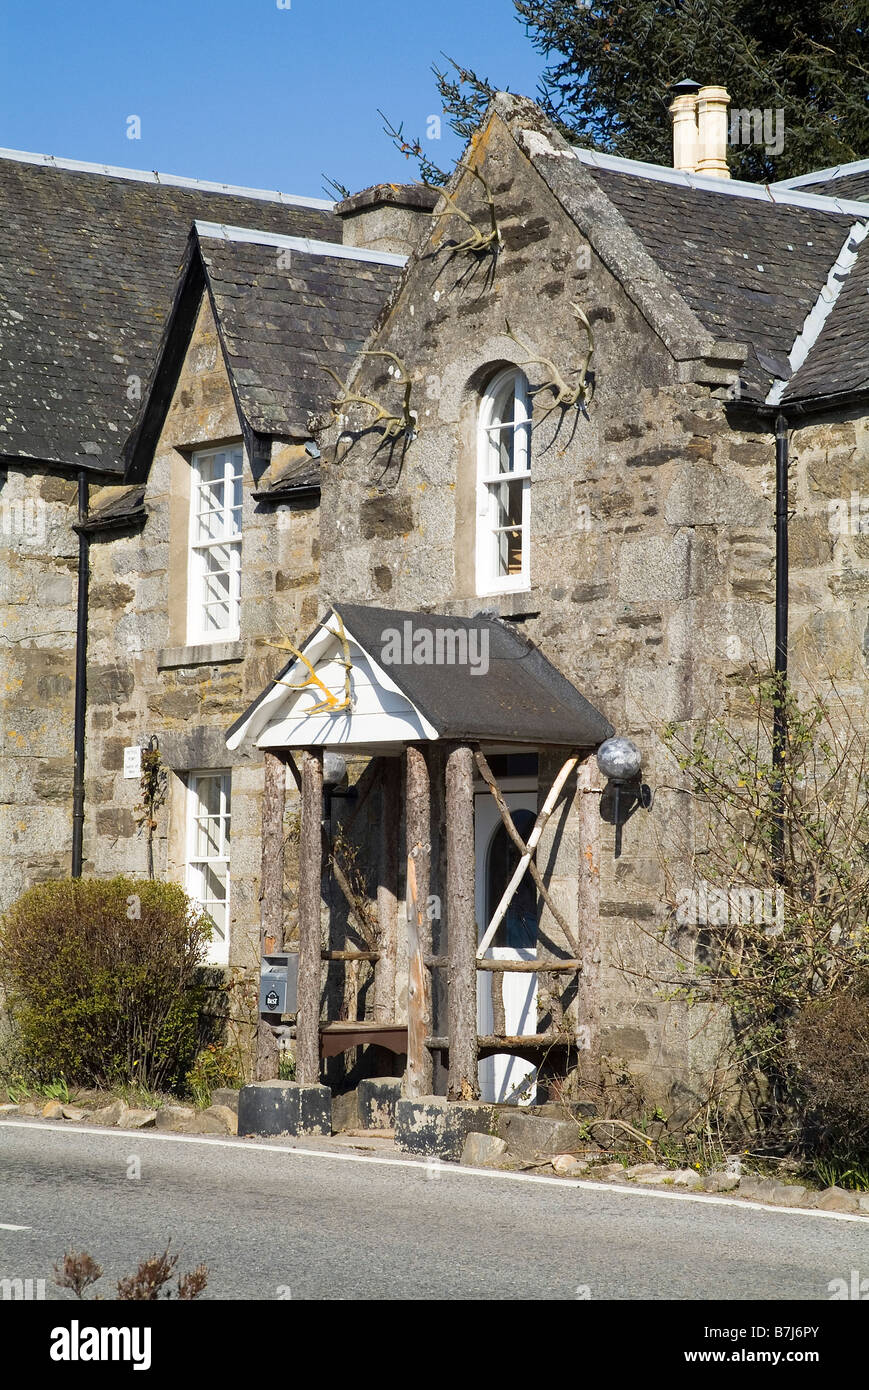 dh Loch Tummel STRATHTUMMEL PERTHSHIRE Hotel accomodation traditional building entrance with stag antlers Stock Photo